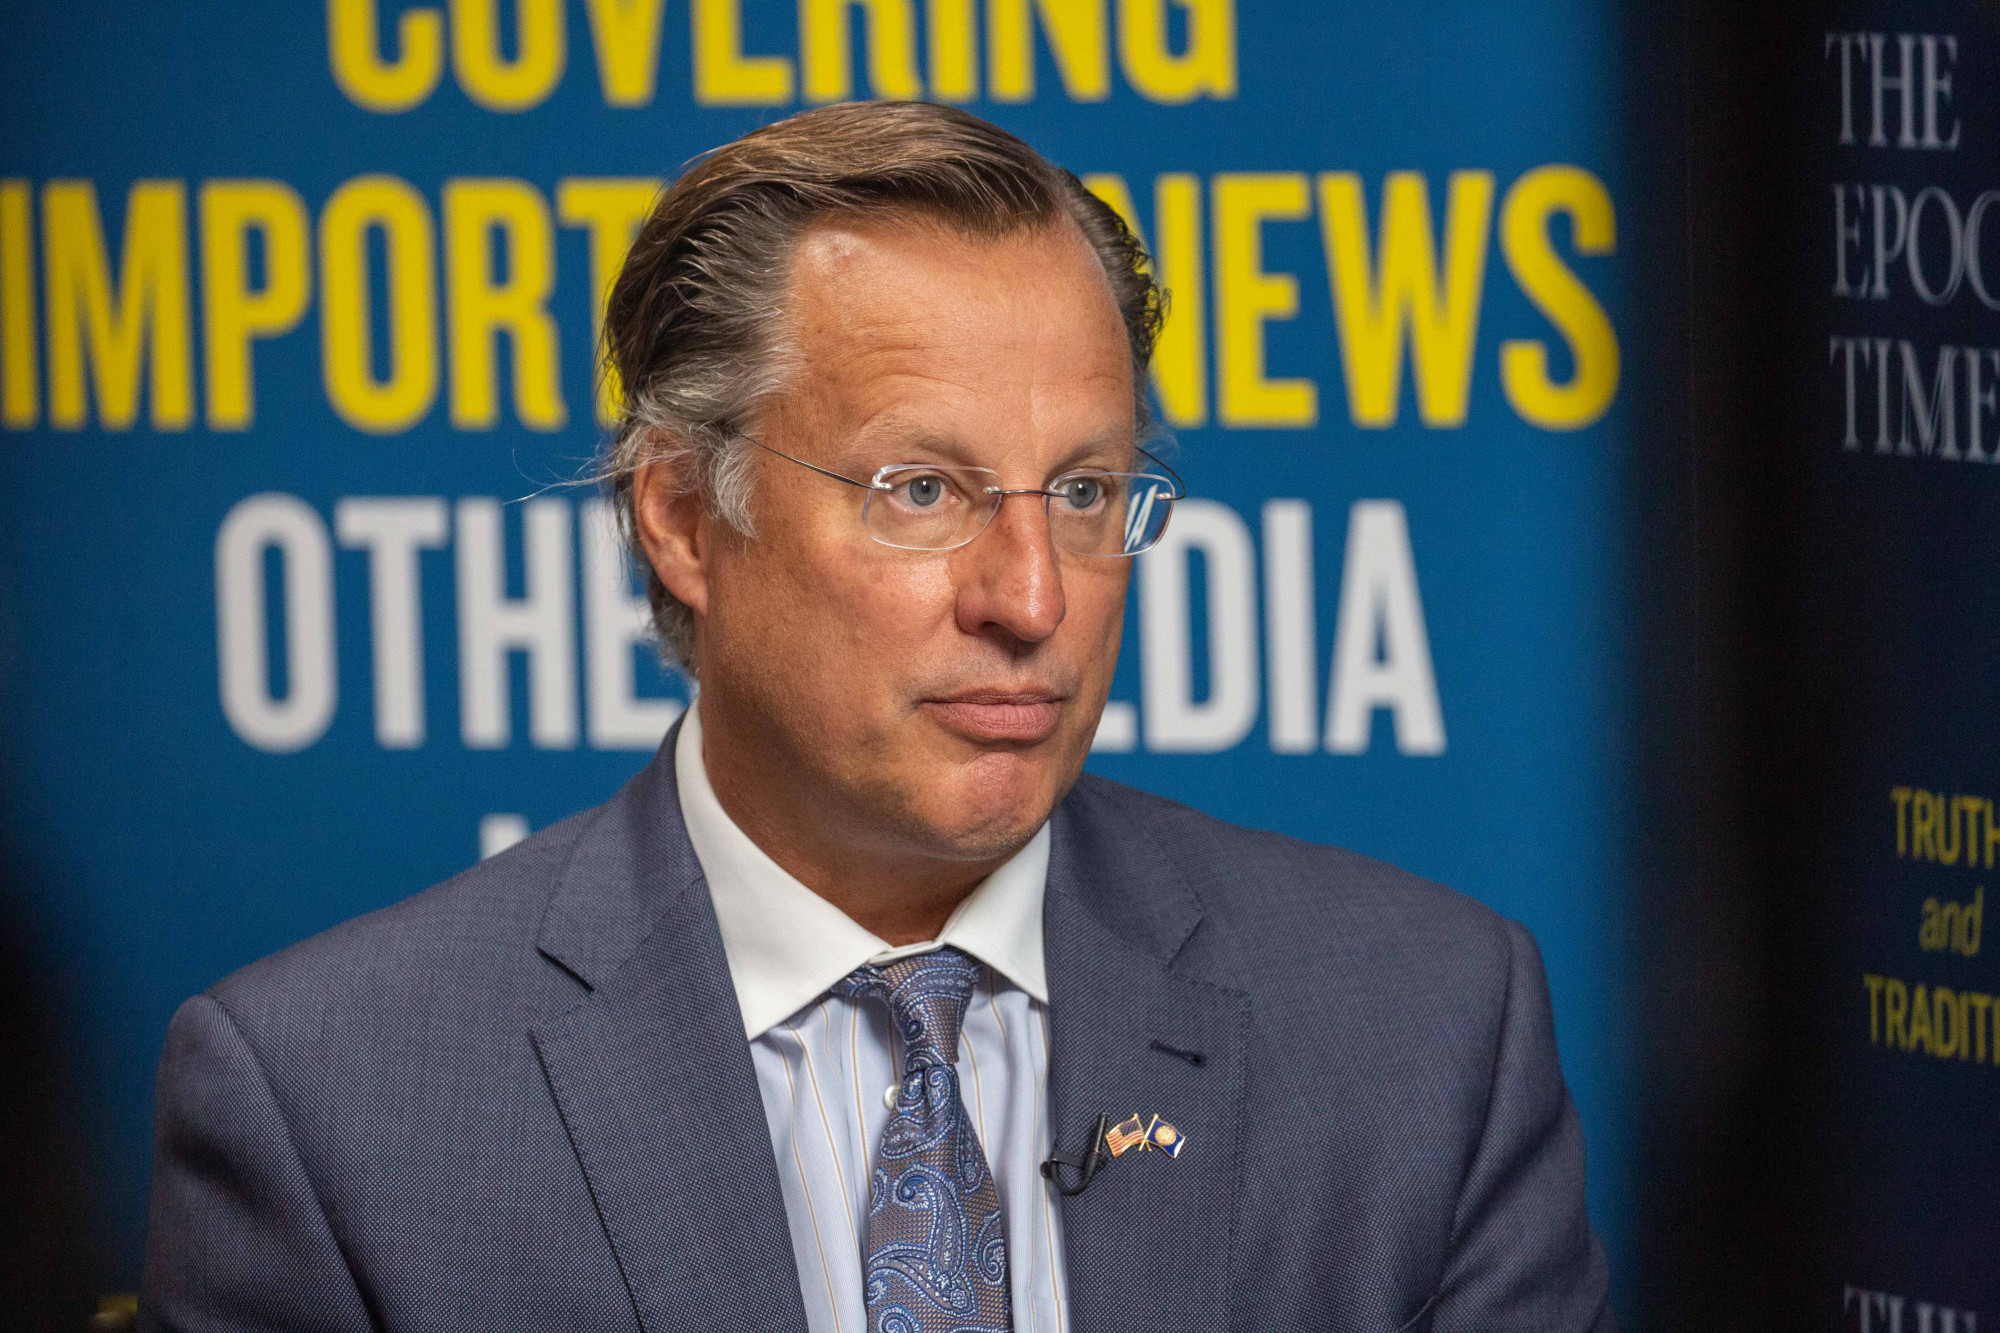 Why the U.S. Should Decouple from China: Dave Brat